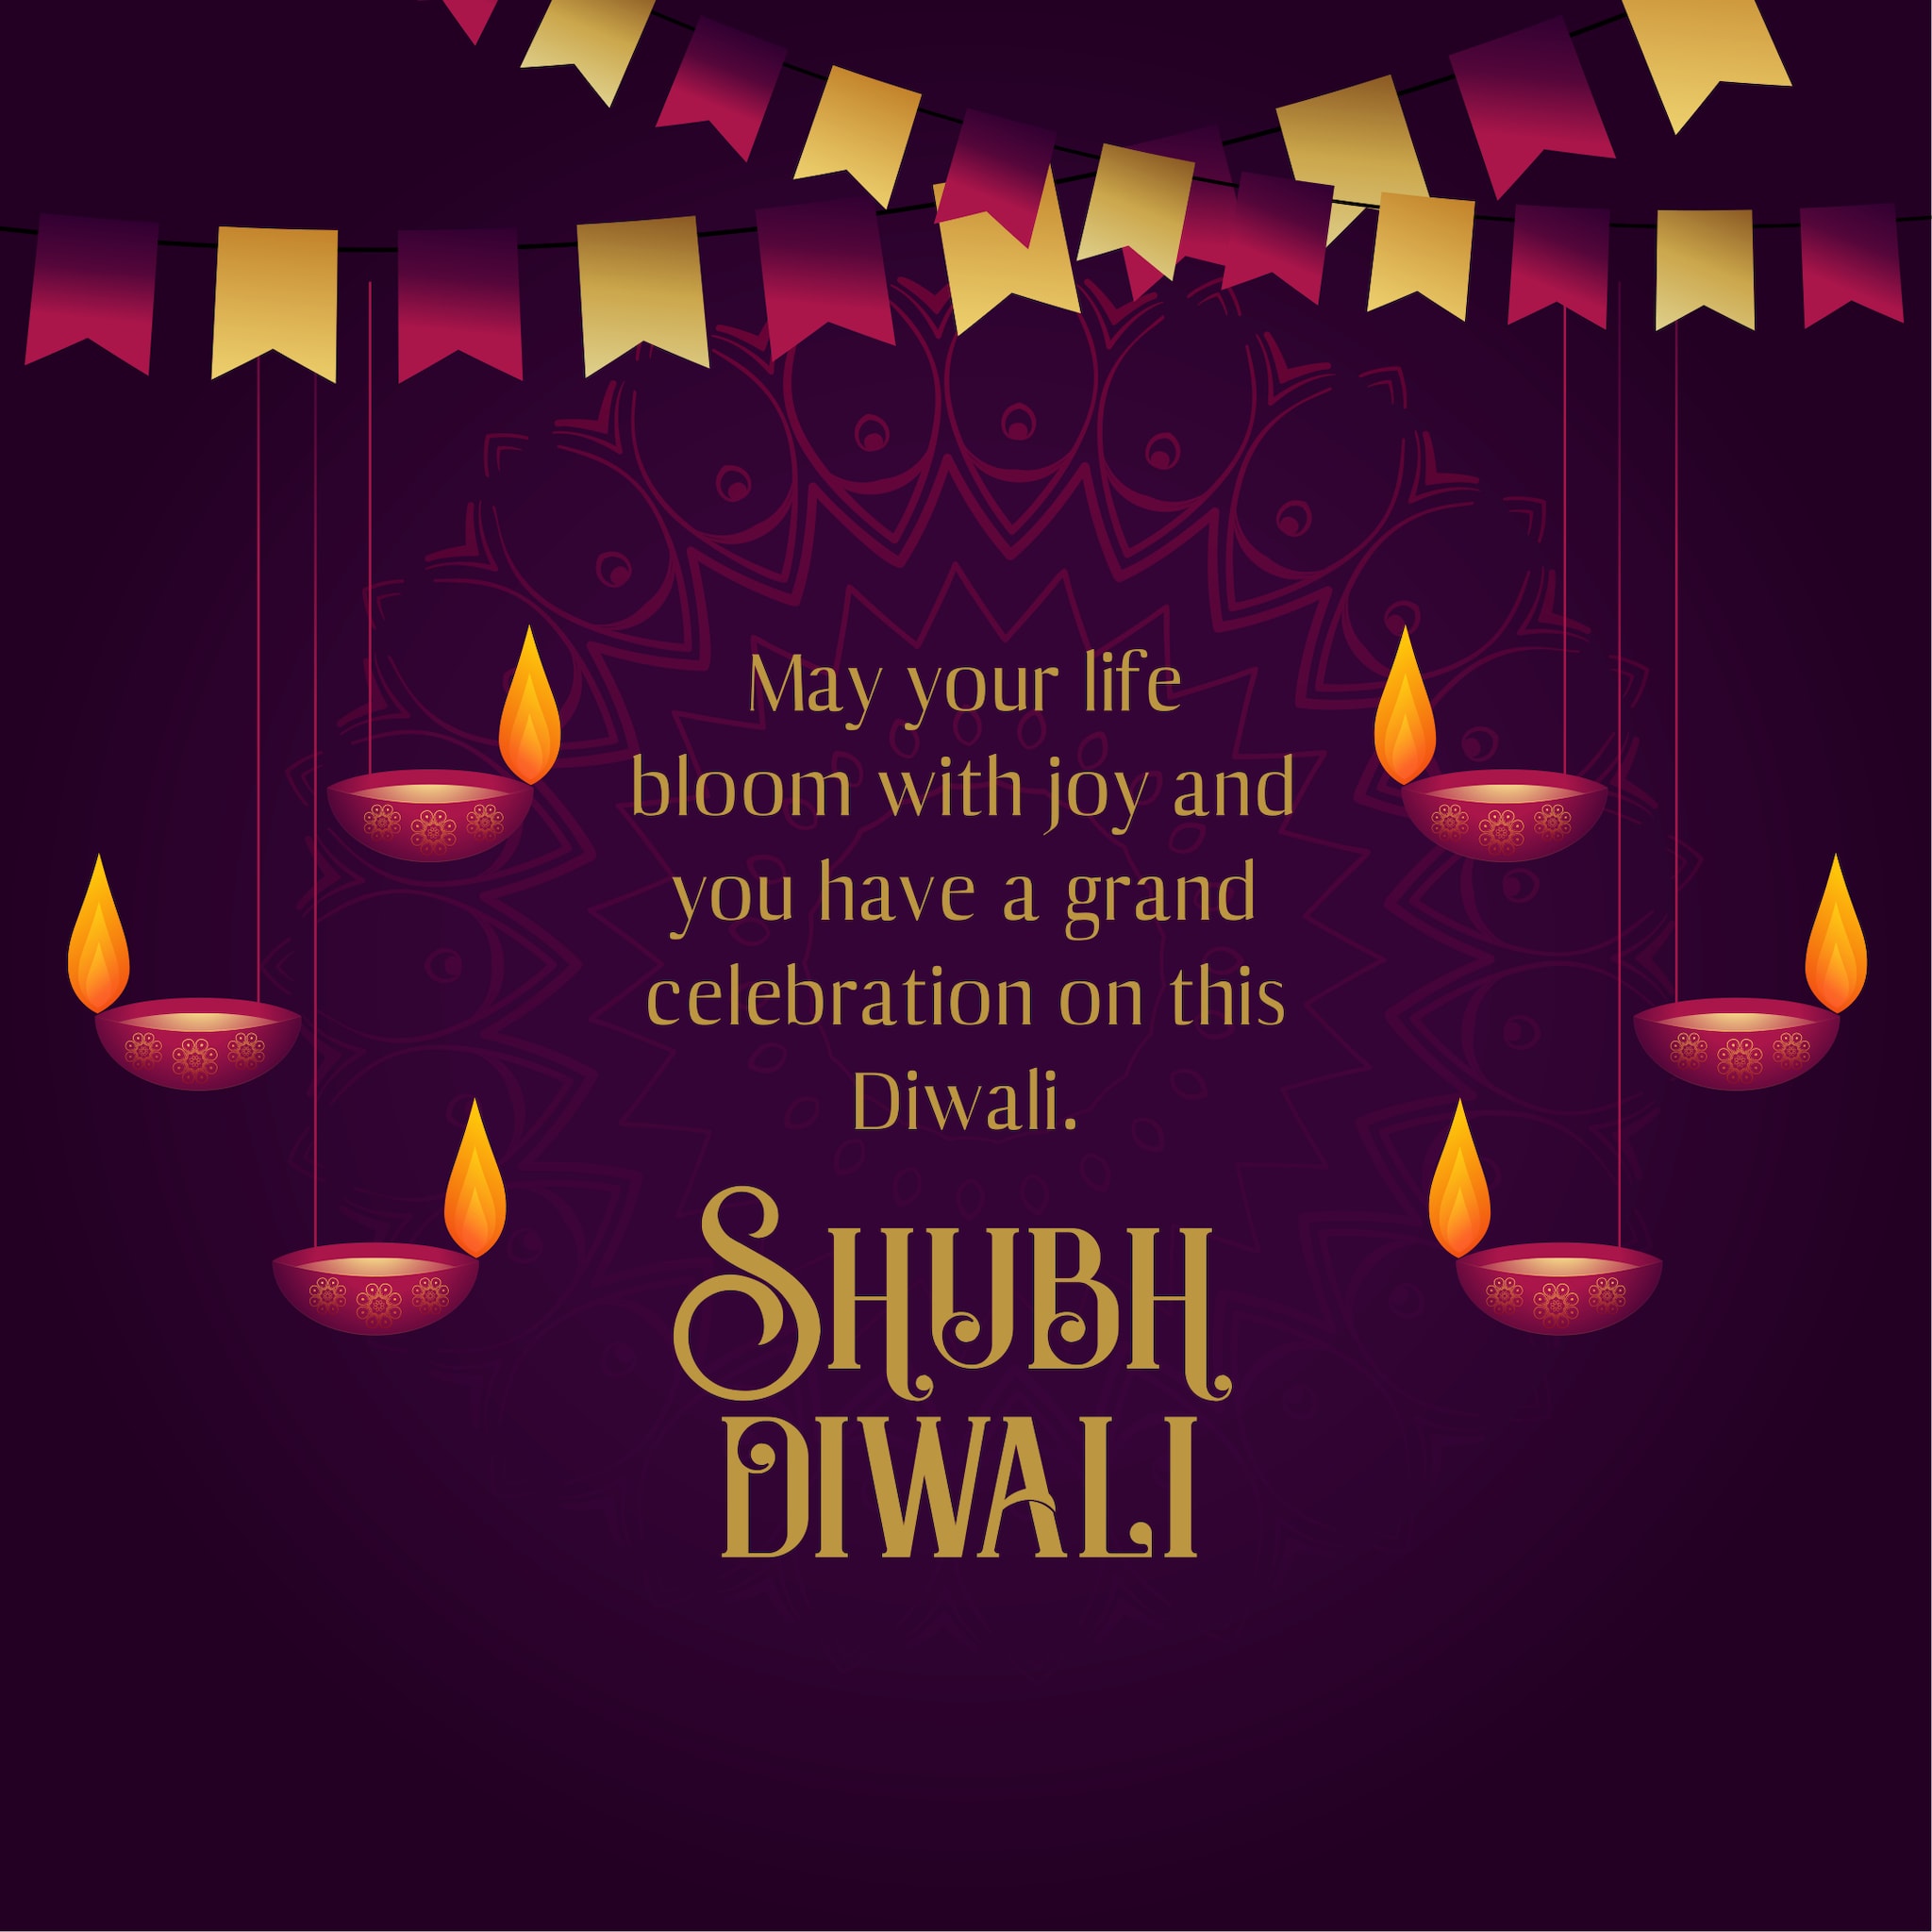 Happy Diwali 2022: Wishes Images, Quotes, Photos, Pics, Facebook SMS and Messages to share with your loved ones. (Image: Shutterstock) 